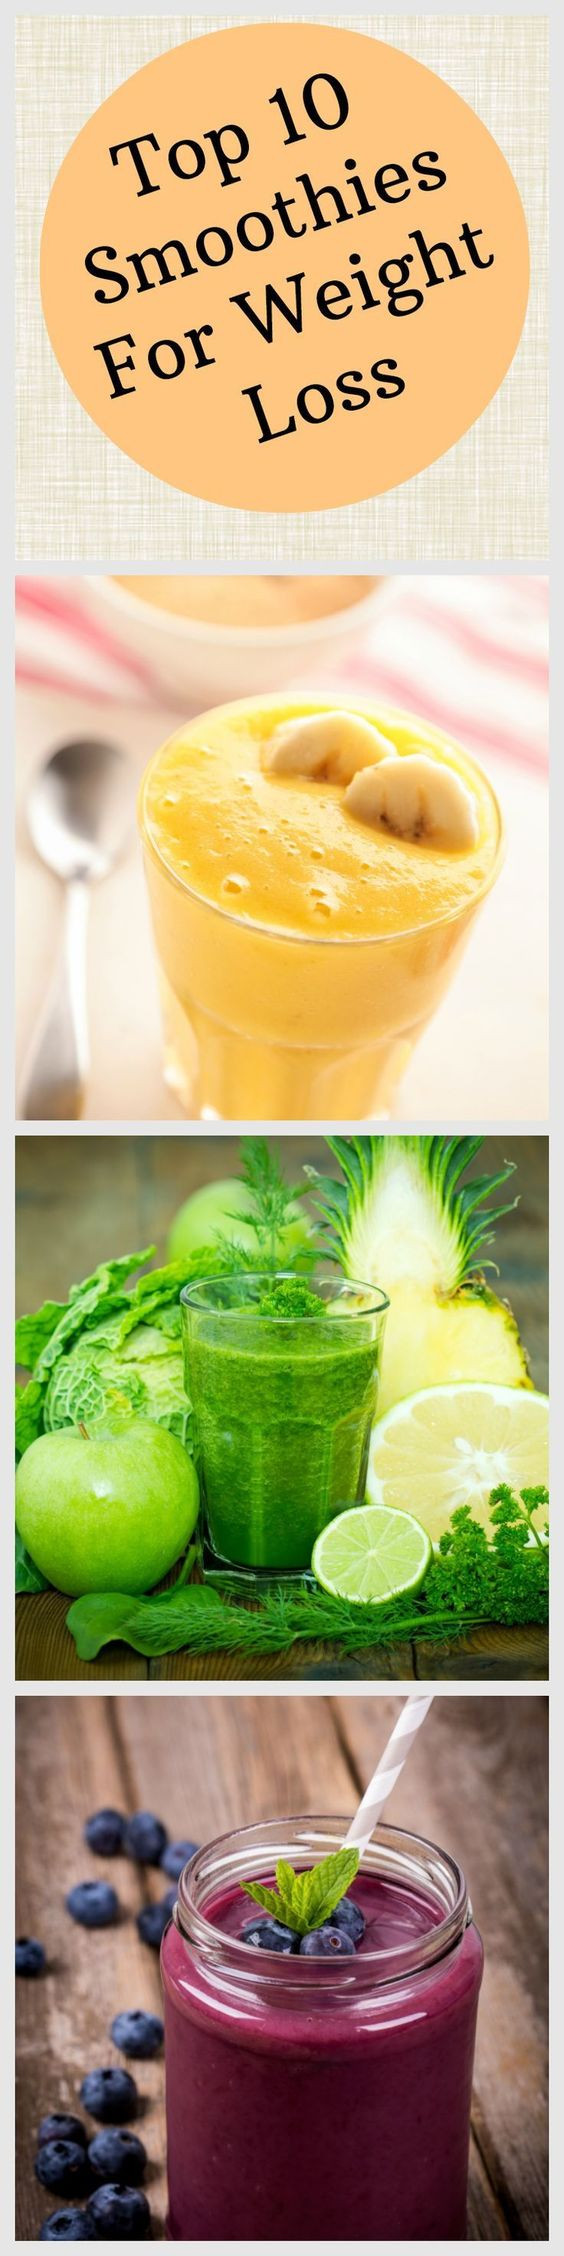 Low Calorie Smoothie Recipes For Weight Loss
 Ten Awesome Smoothies for Weight Loss low calorie but